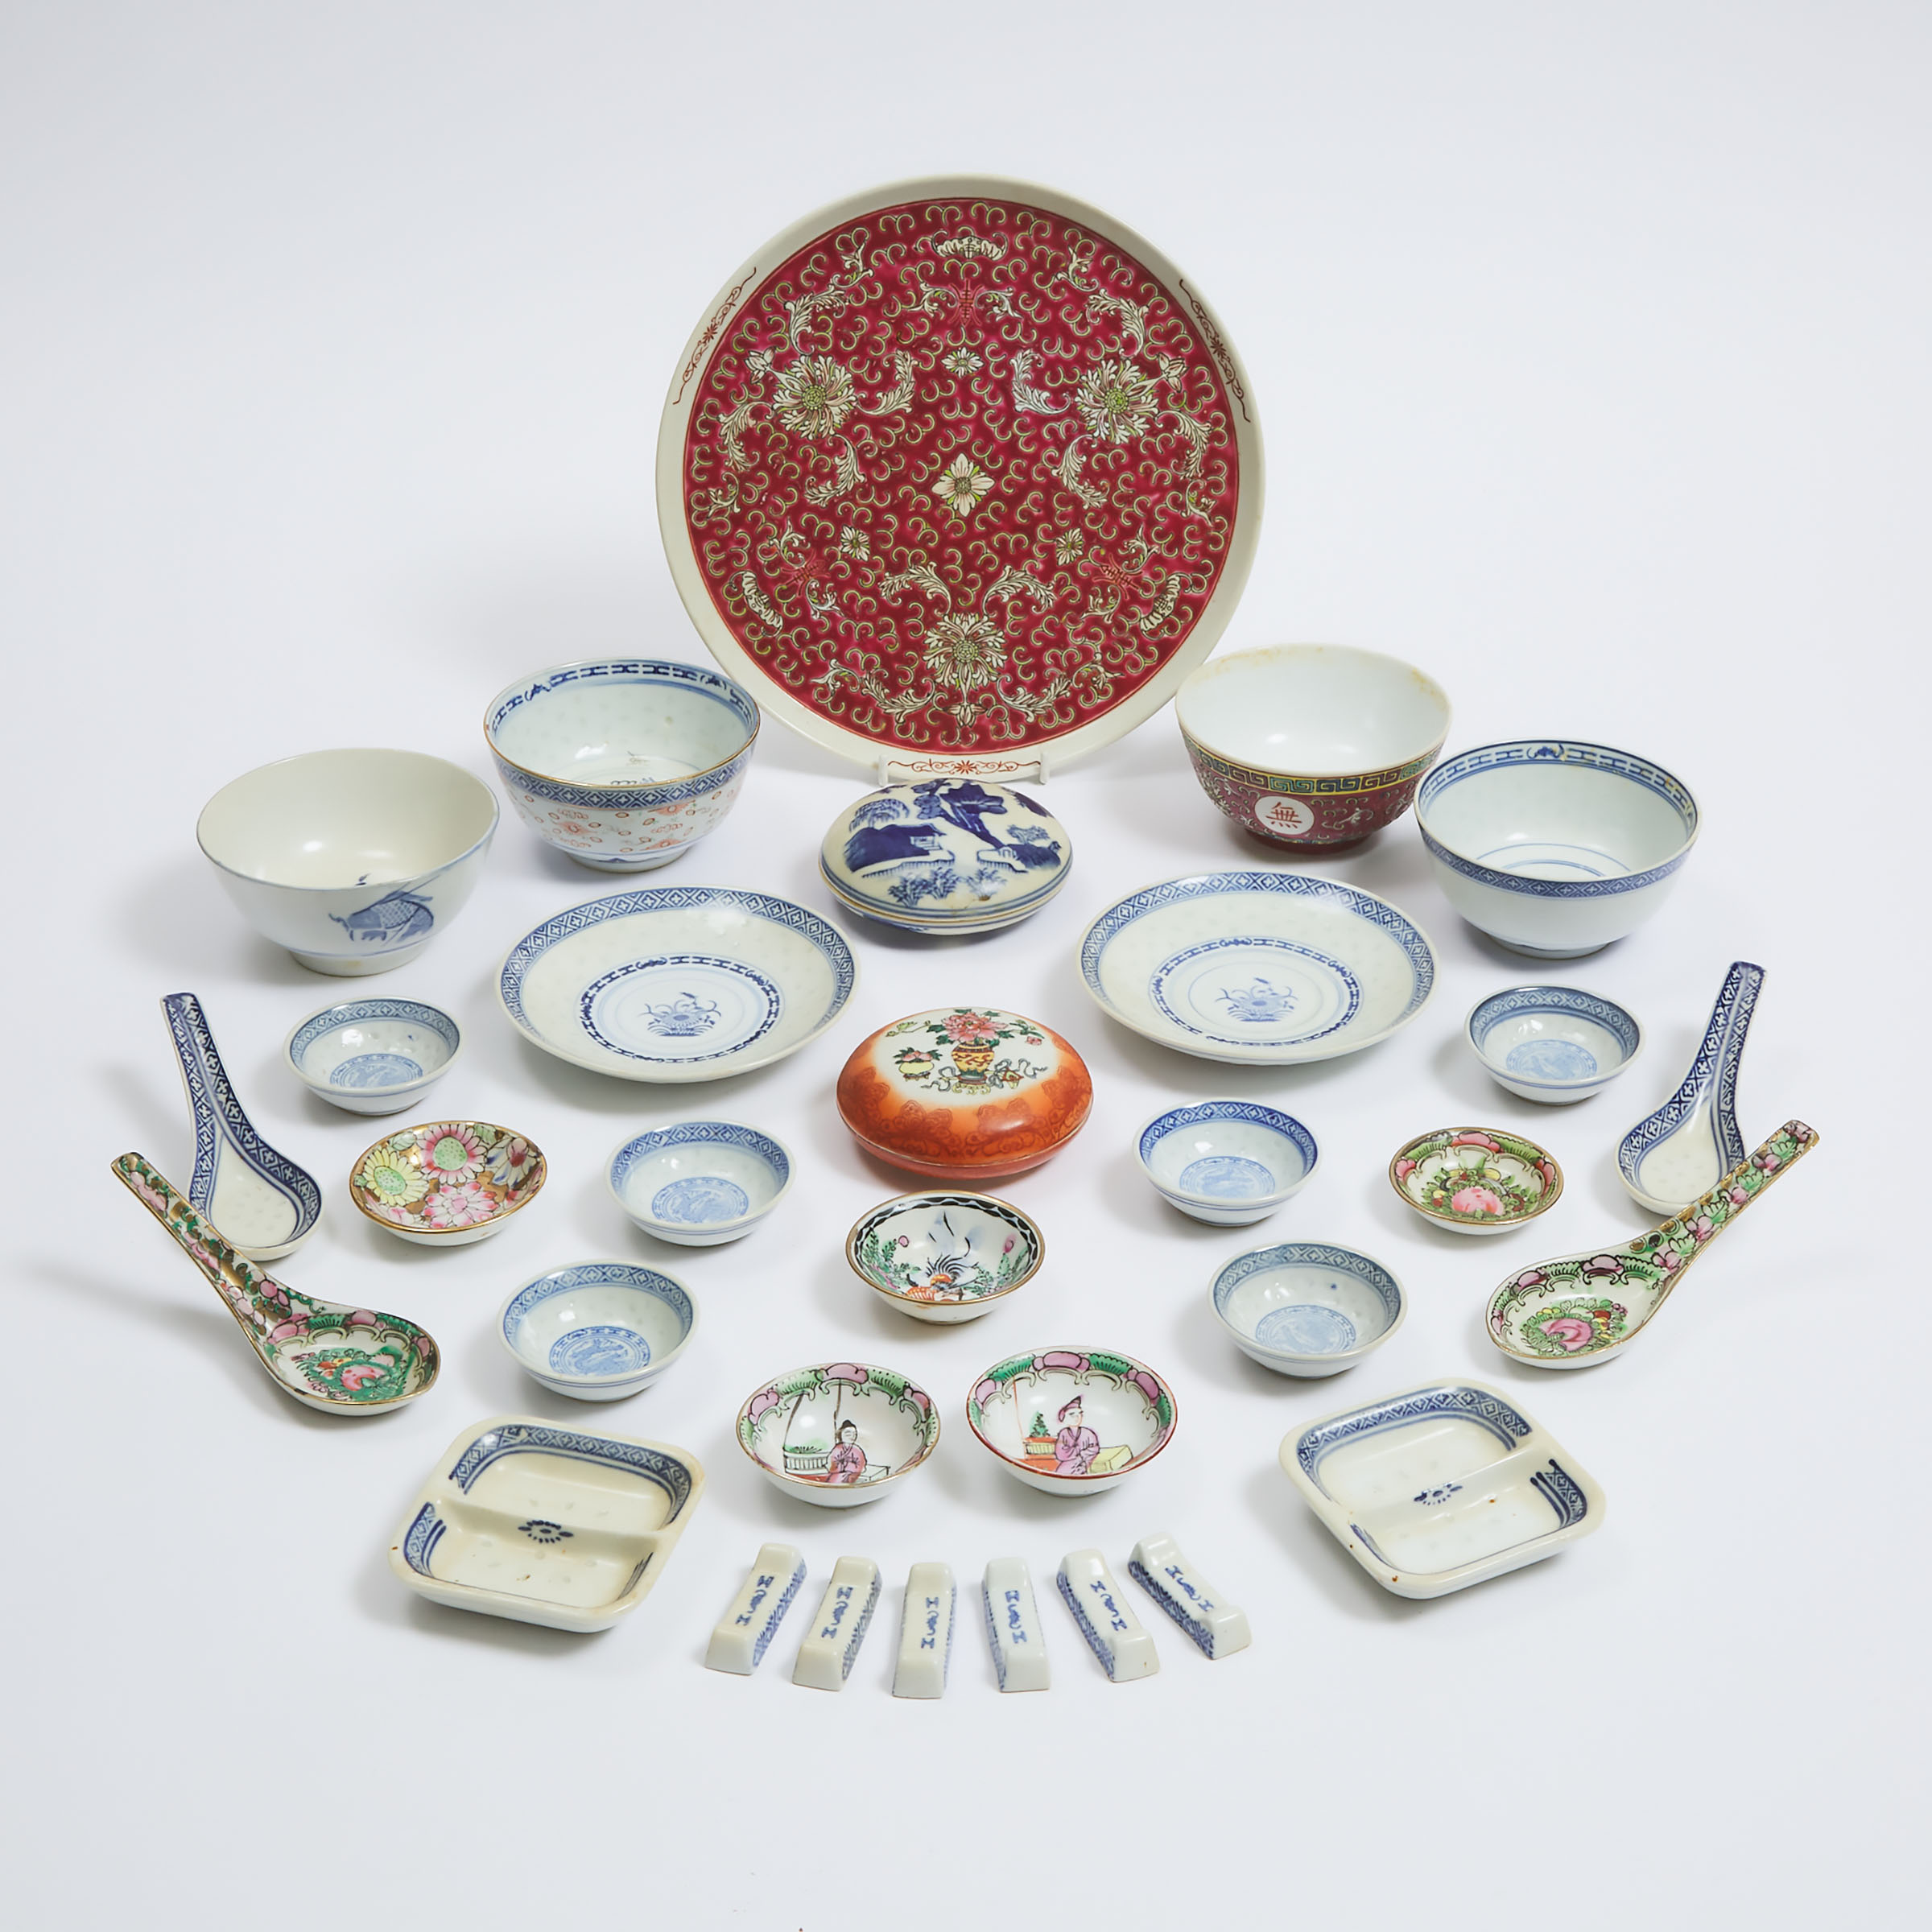 A Group of Thirty-Two Chinese Porcelain Wares, 20th Century